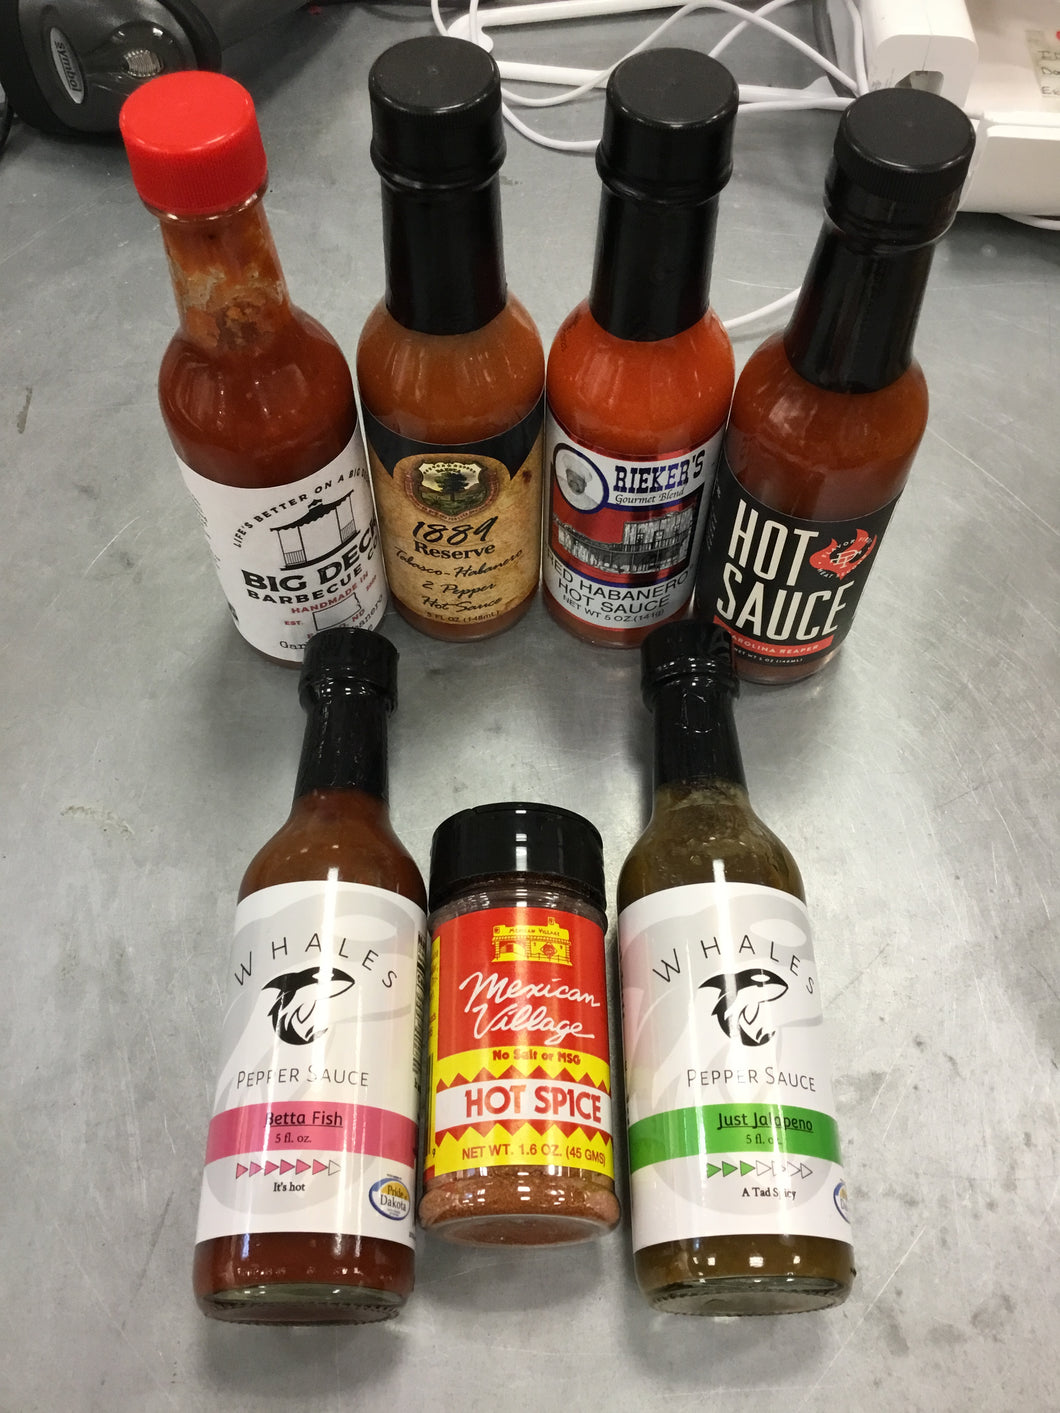 Hot Sauce Care Package $49.99